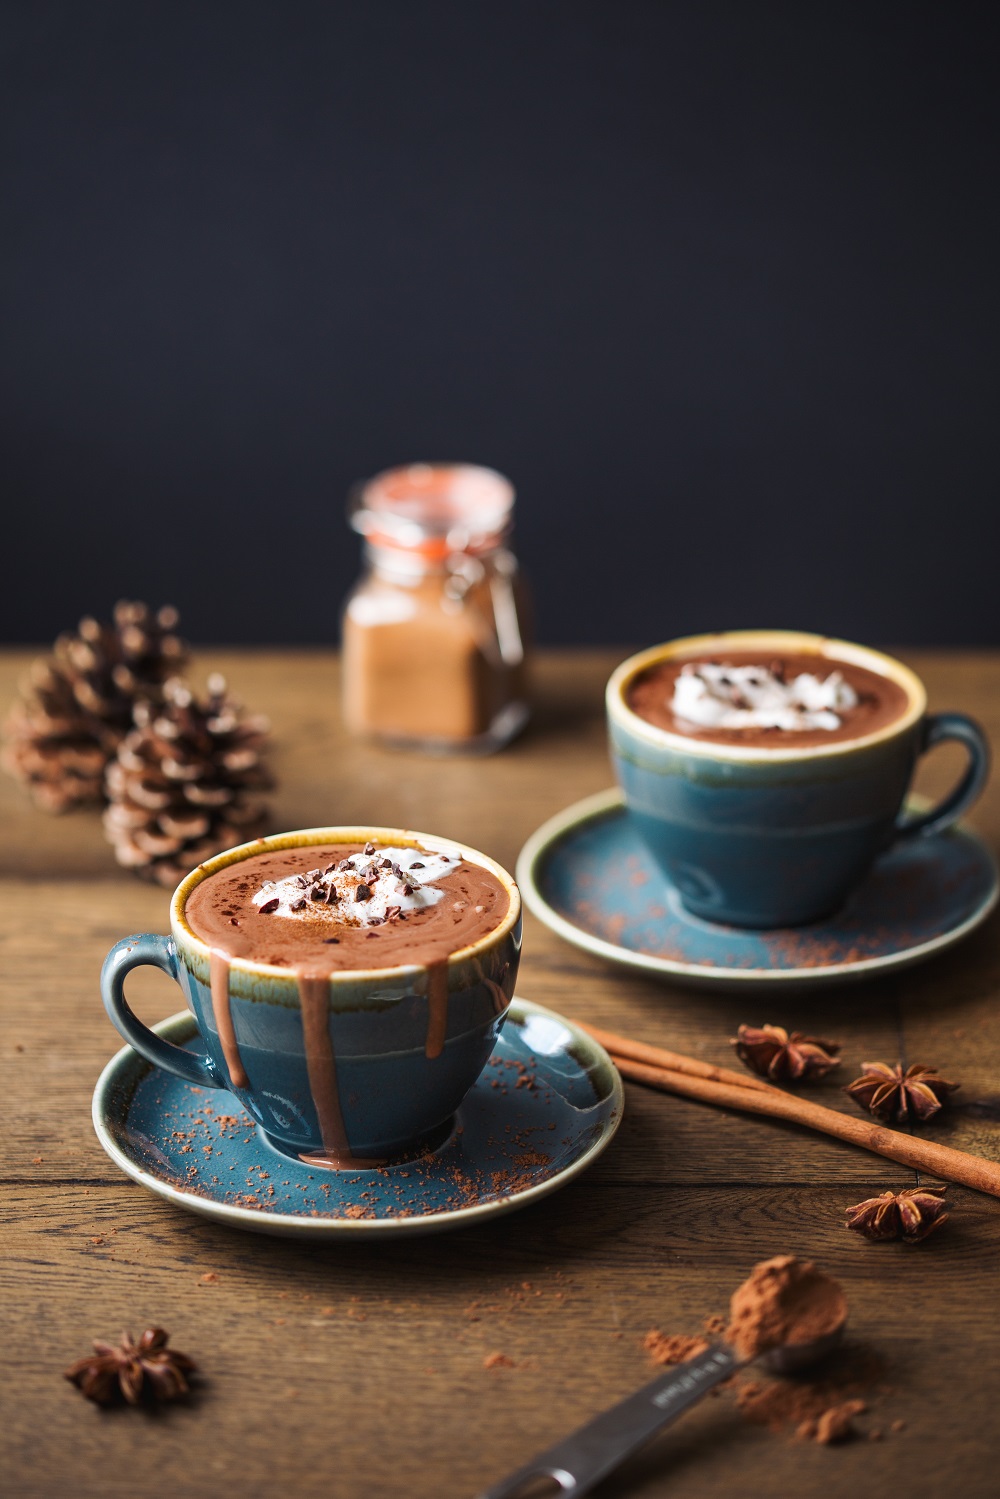 The Paleo Foods Co. Spiced Almond Milk Hot Chocolate